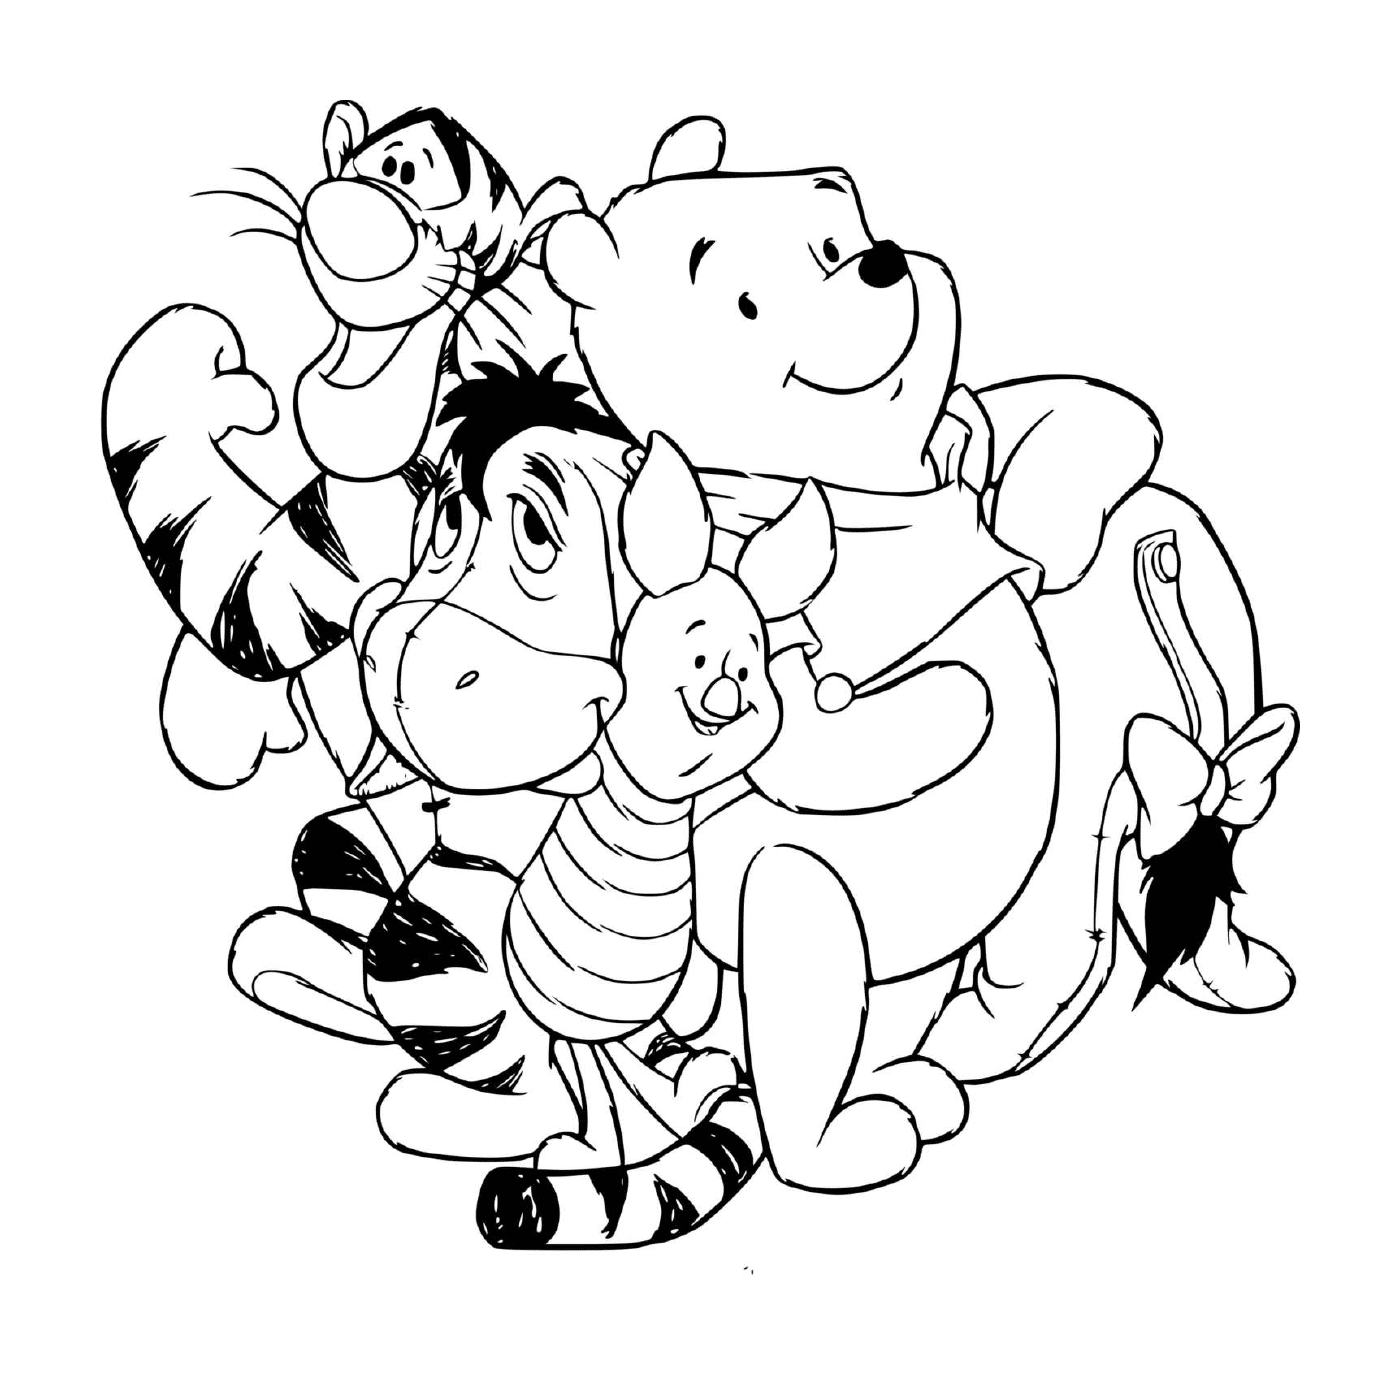  Winnie the bear with Tigrou, Bourriquet and Porcinet 